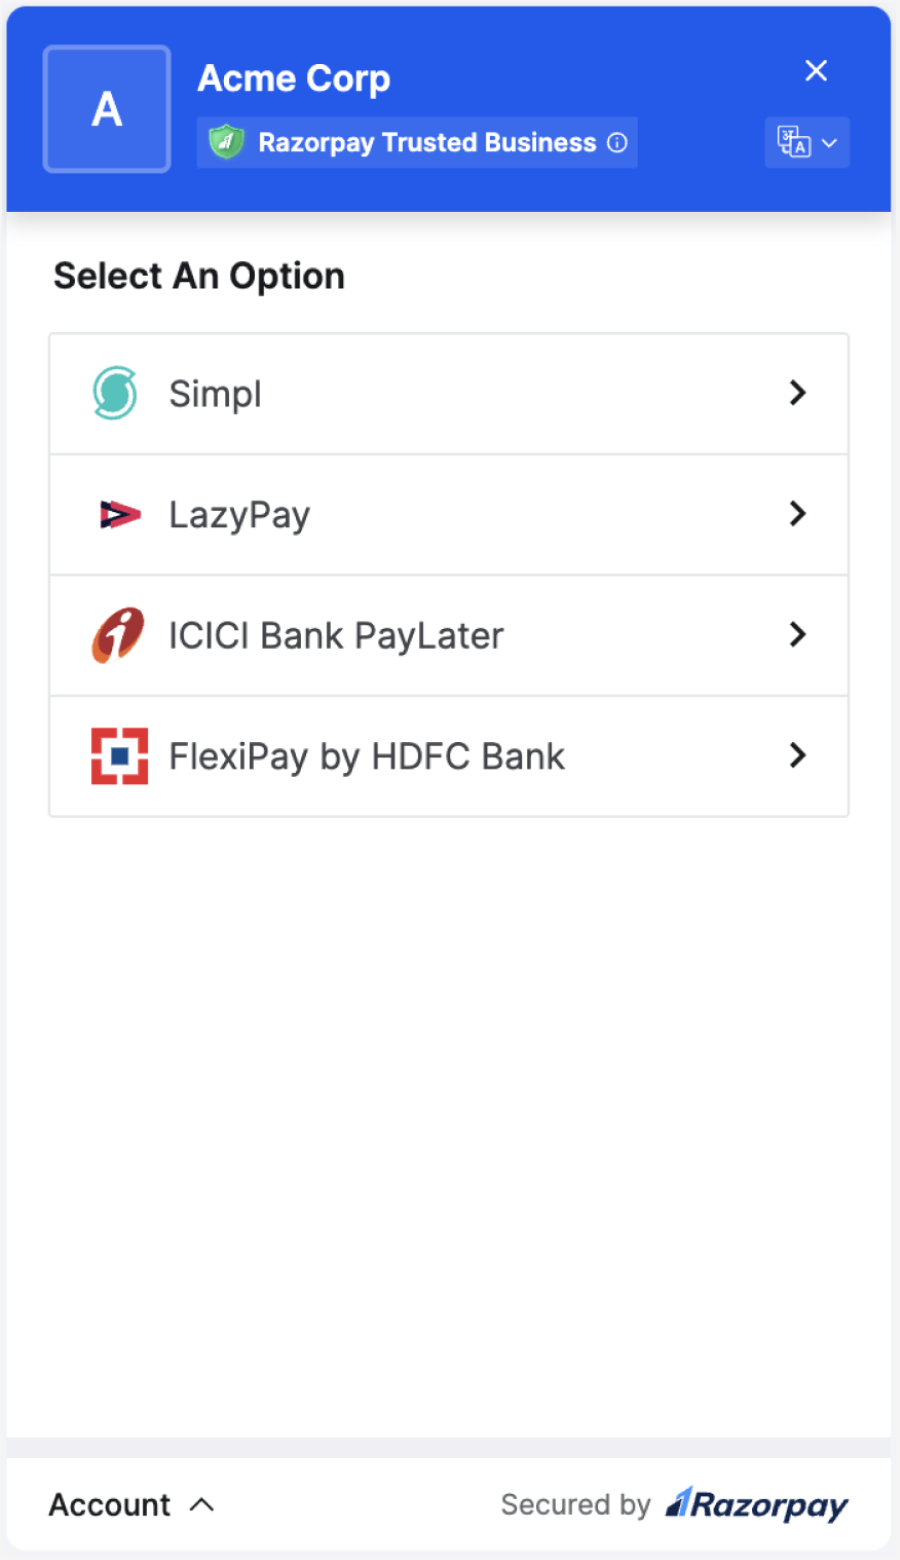 Select the preferred provider from the list of Pay Later providers